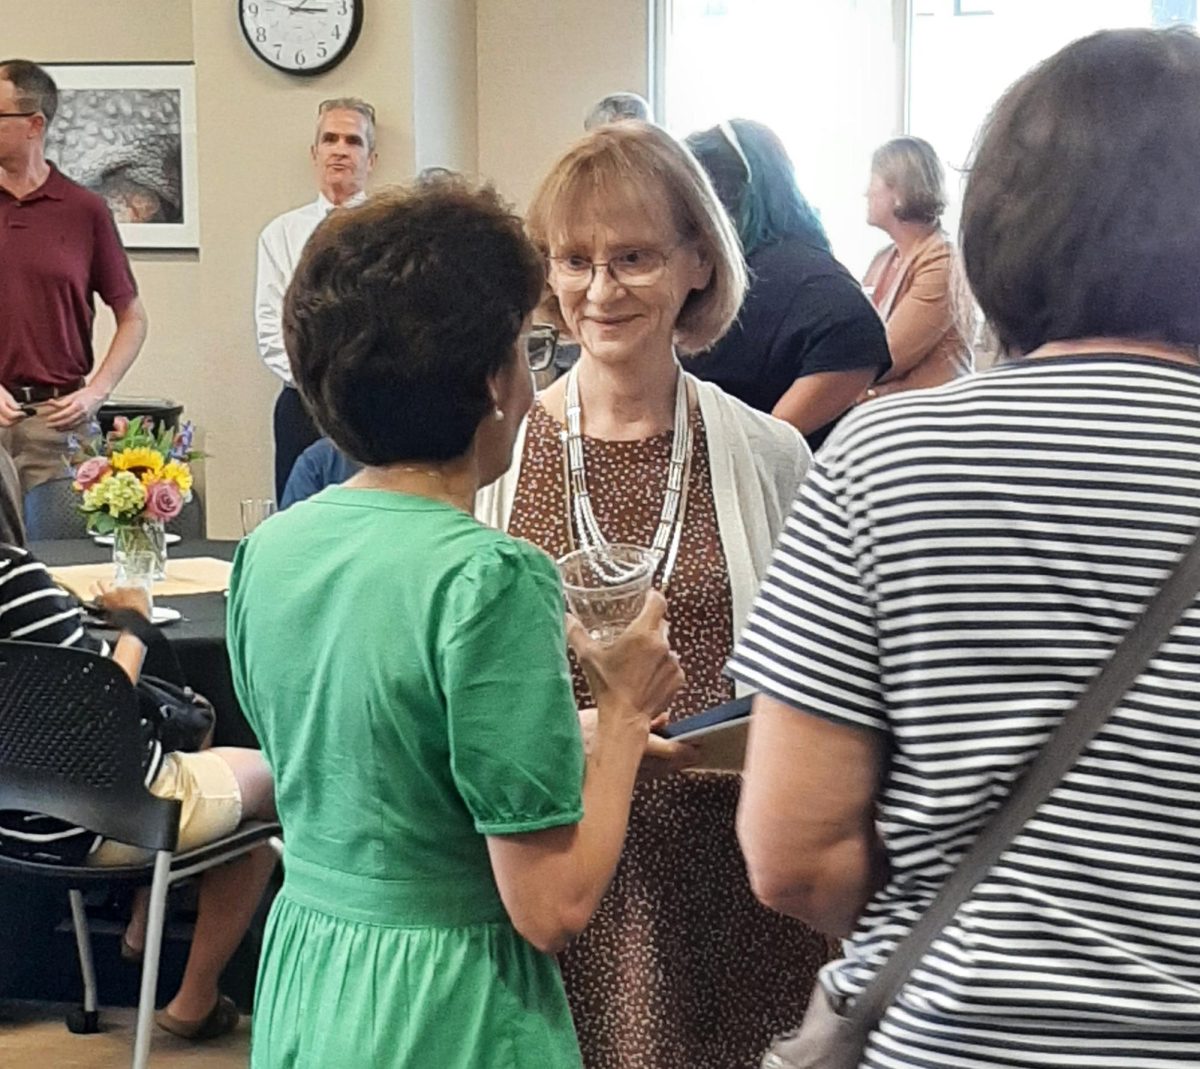 Kathy Downes, retiring dean of university libraries, speaks with a guest at her retirement reception on Aug. 31.